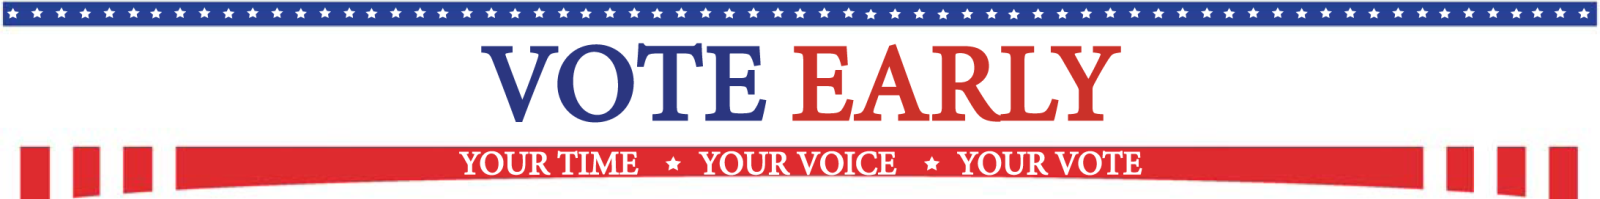 Early Voting Banner